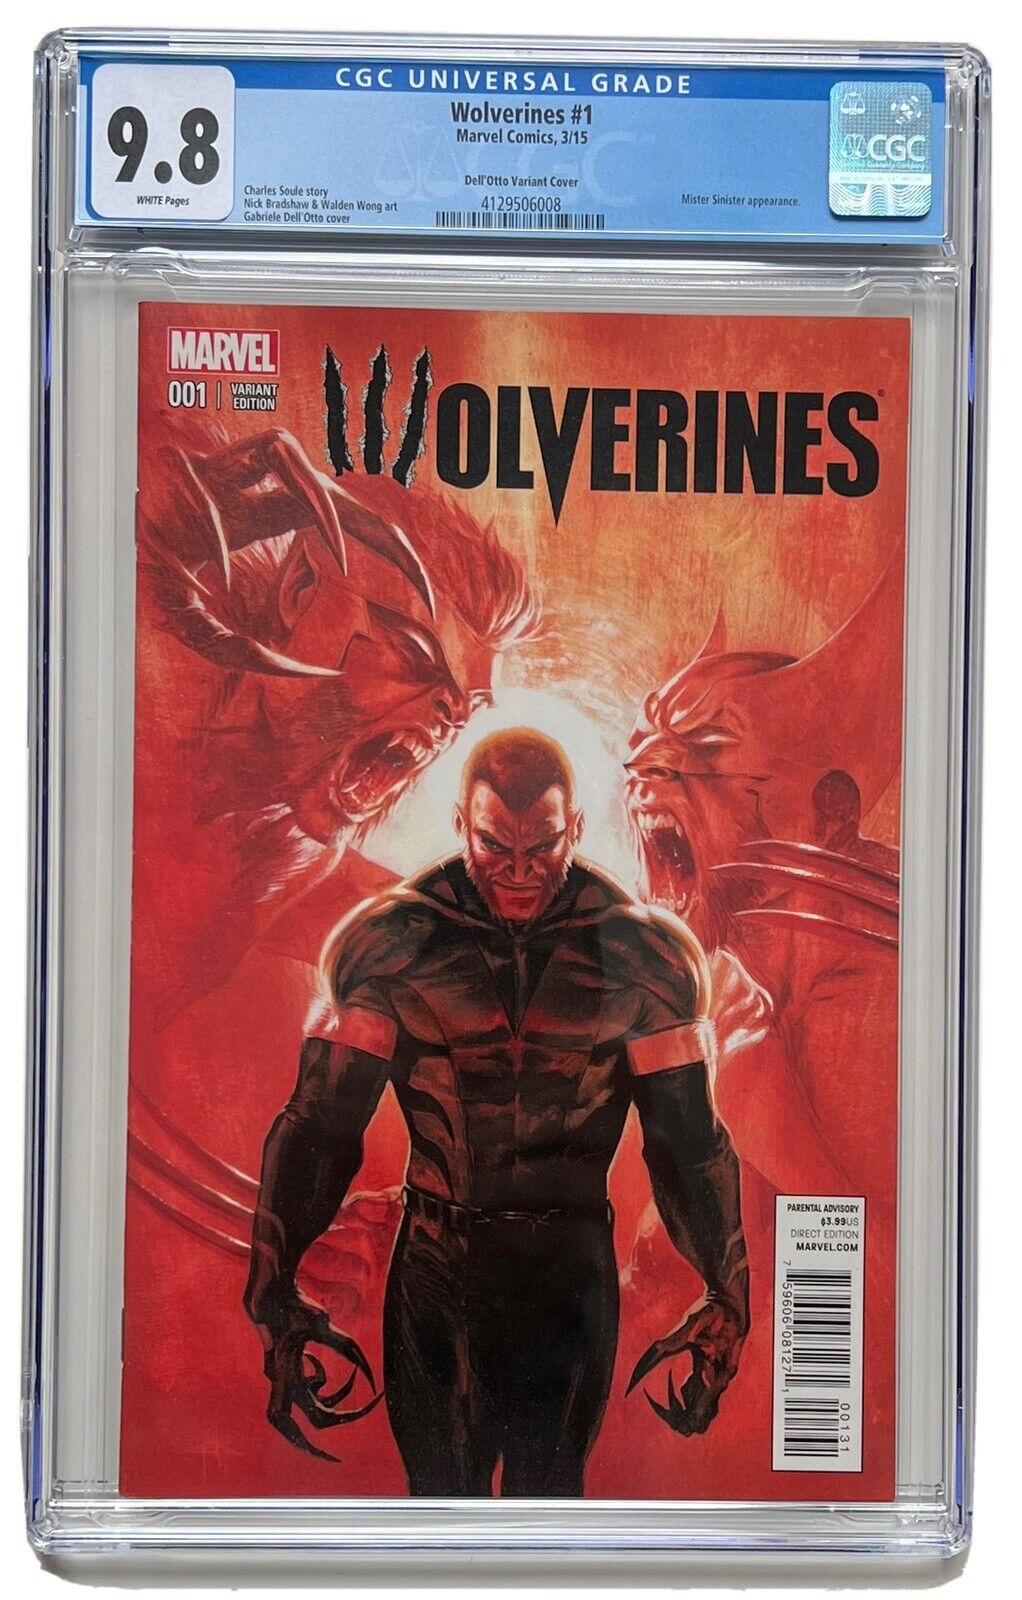 Wolverines 1 Gabrielle Dell\'Otto Variant CGC 9.8 X-23 Sabretooth 2015 Marvel